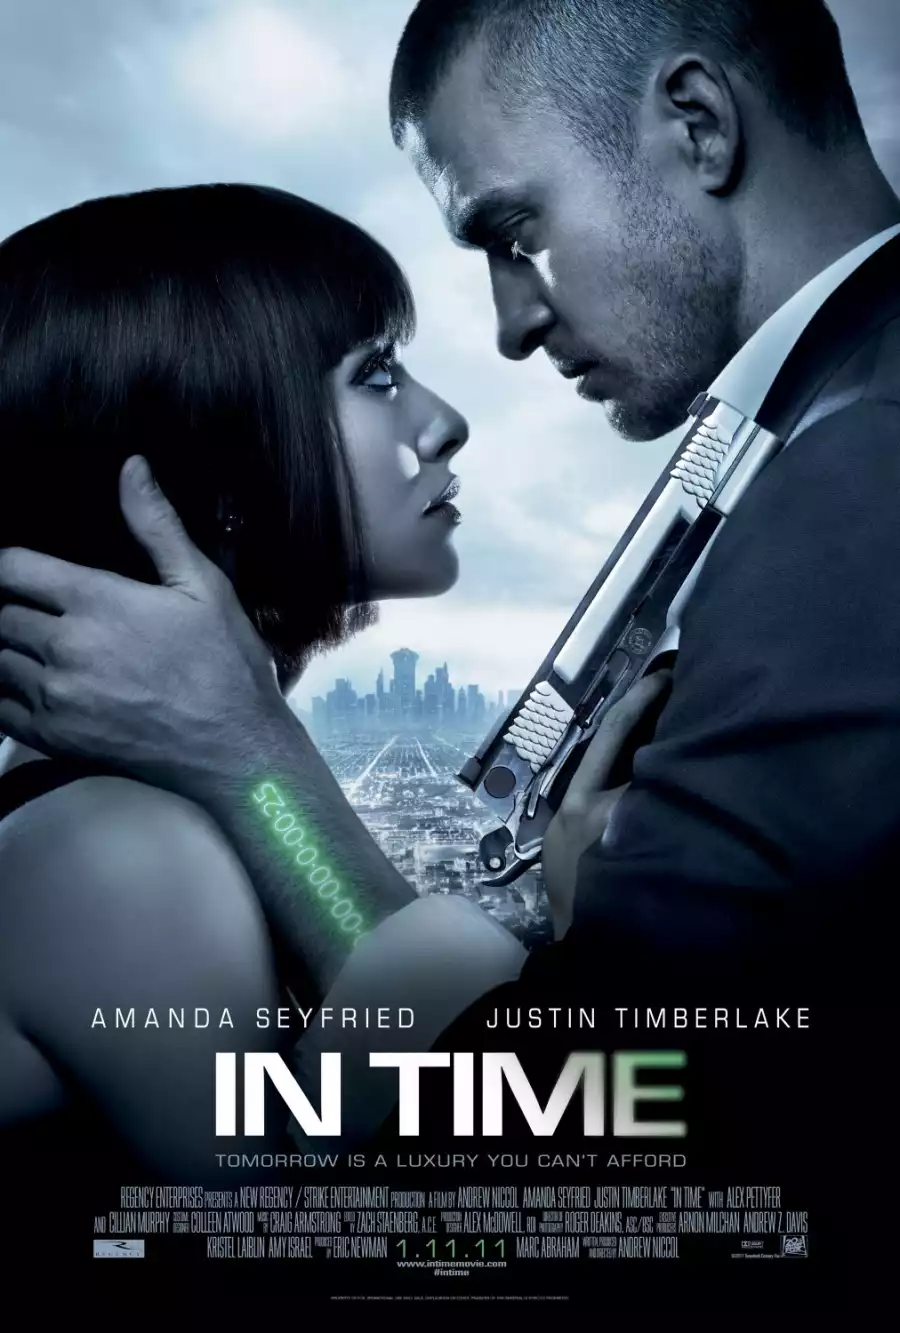 faq about time travel full movie download in hindi 480p